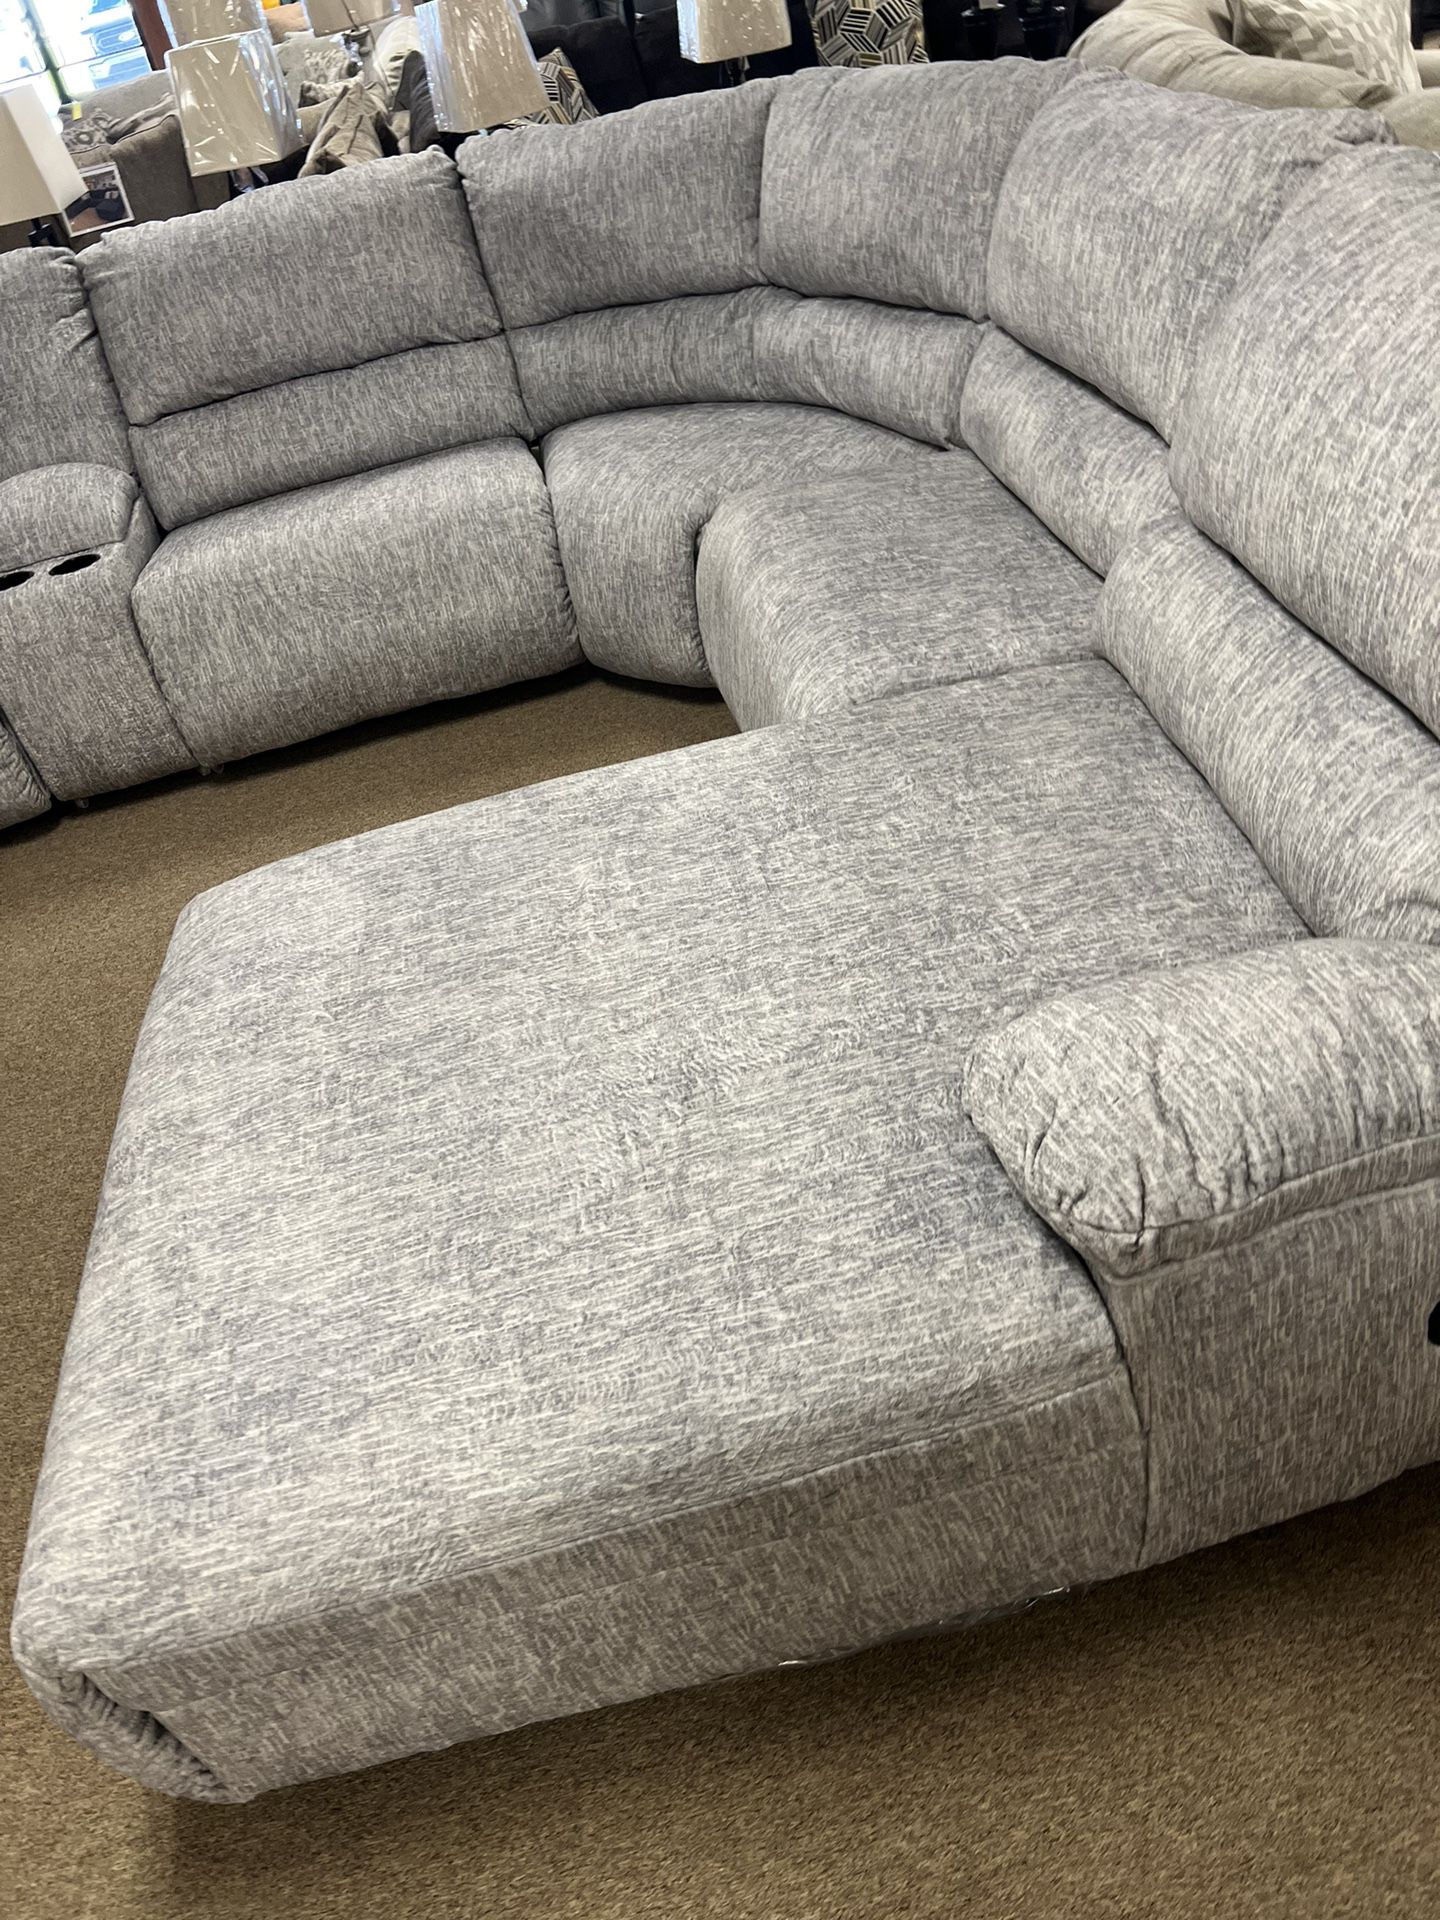 Entertainment Reclining Theater Sectional!